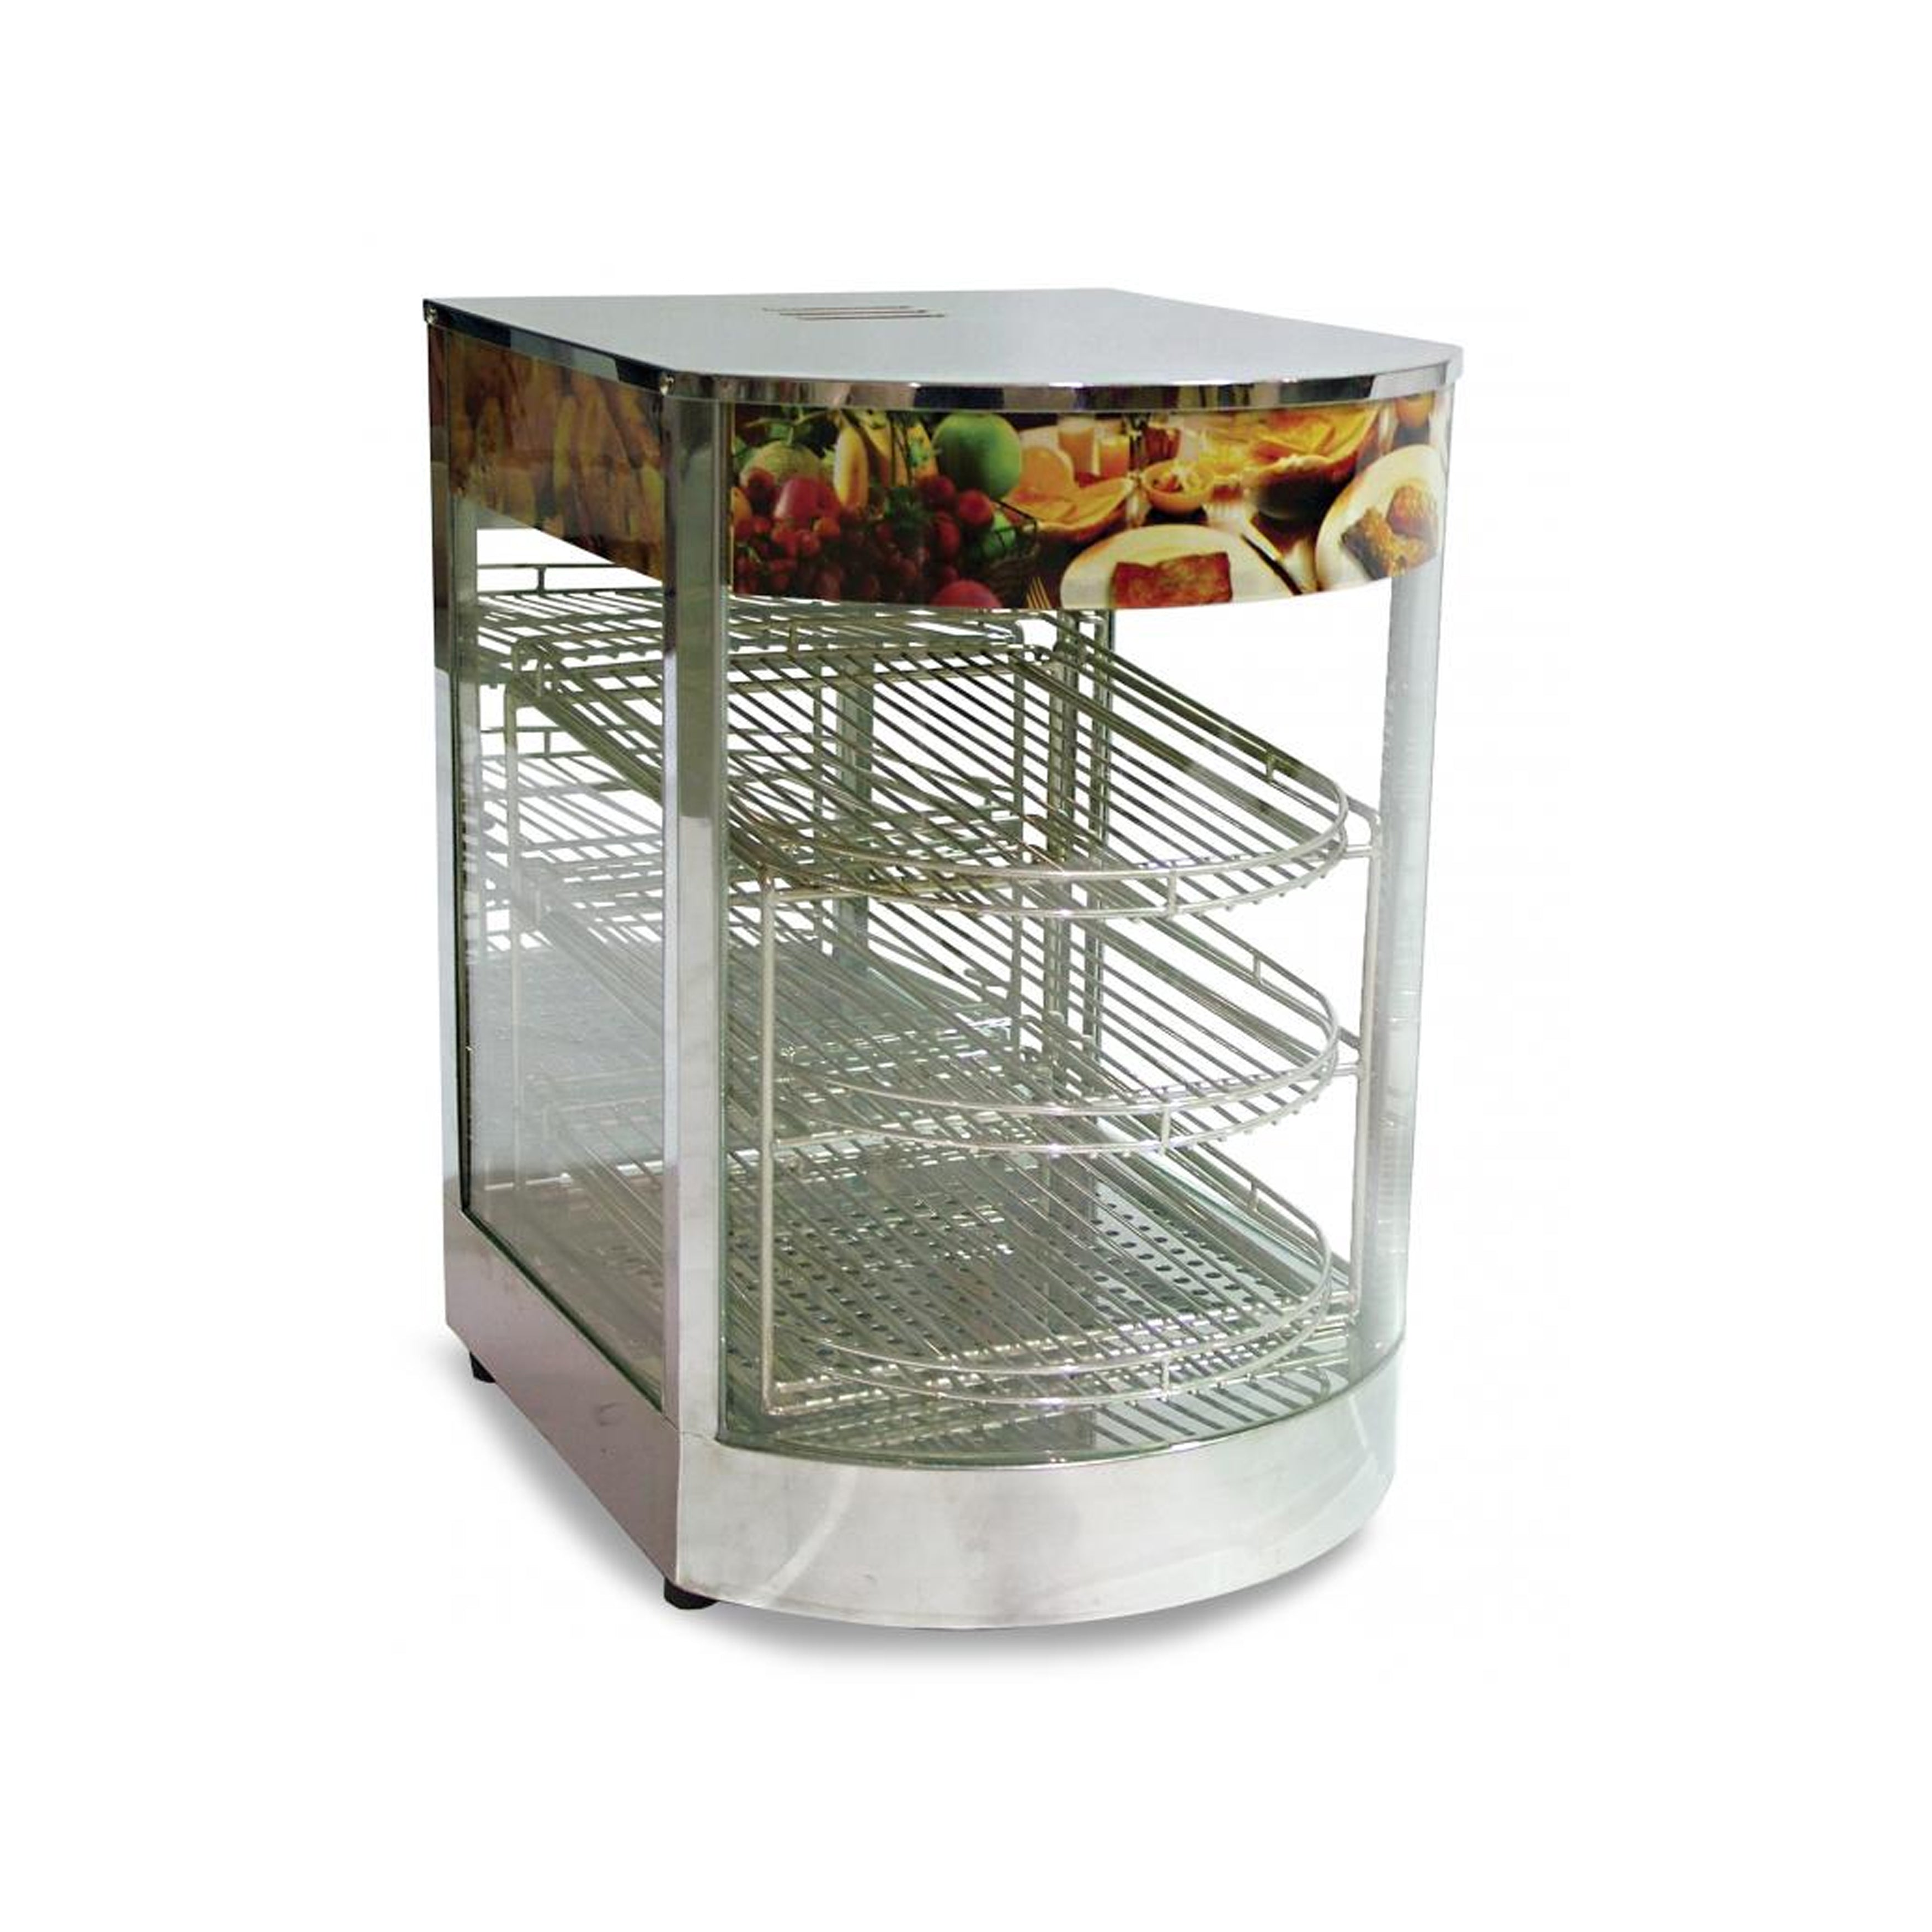 Omcan - 21829, Commercial 14" Curved Glass Countertop Display Warmer